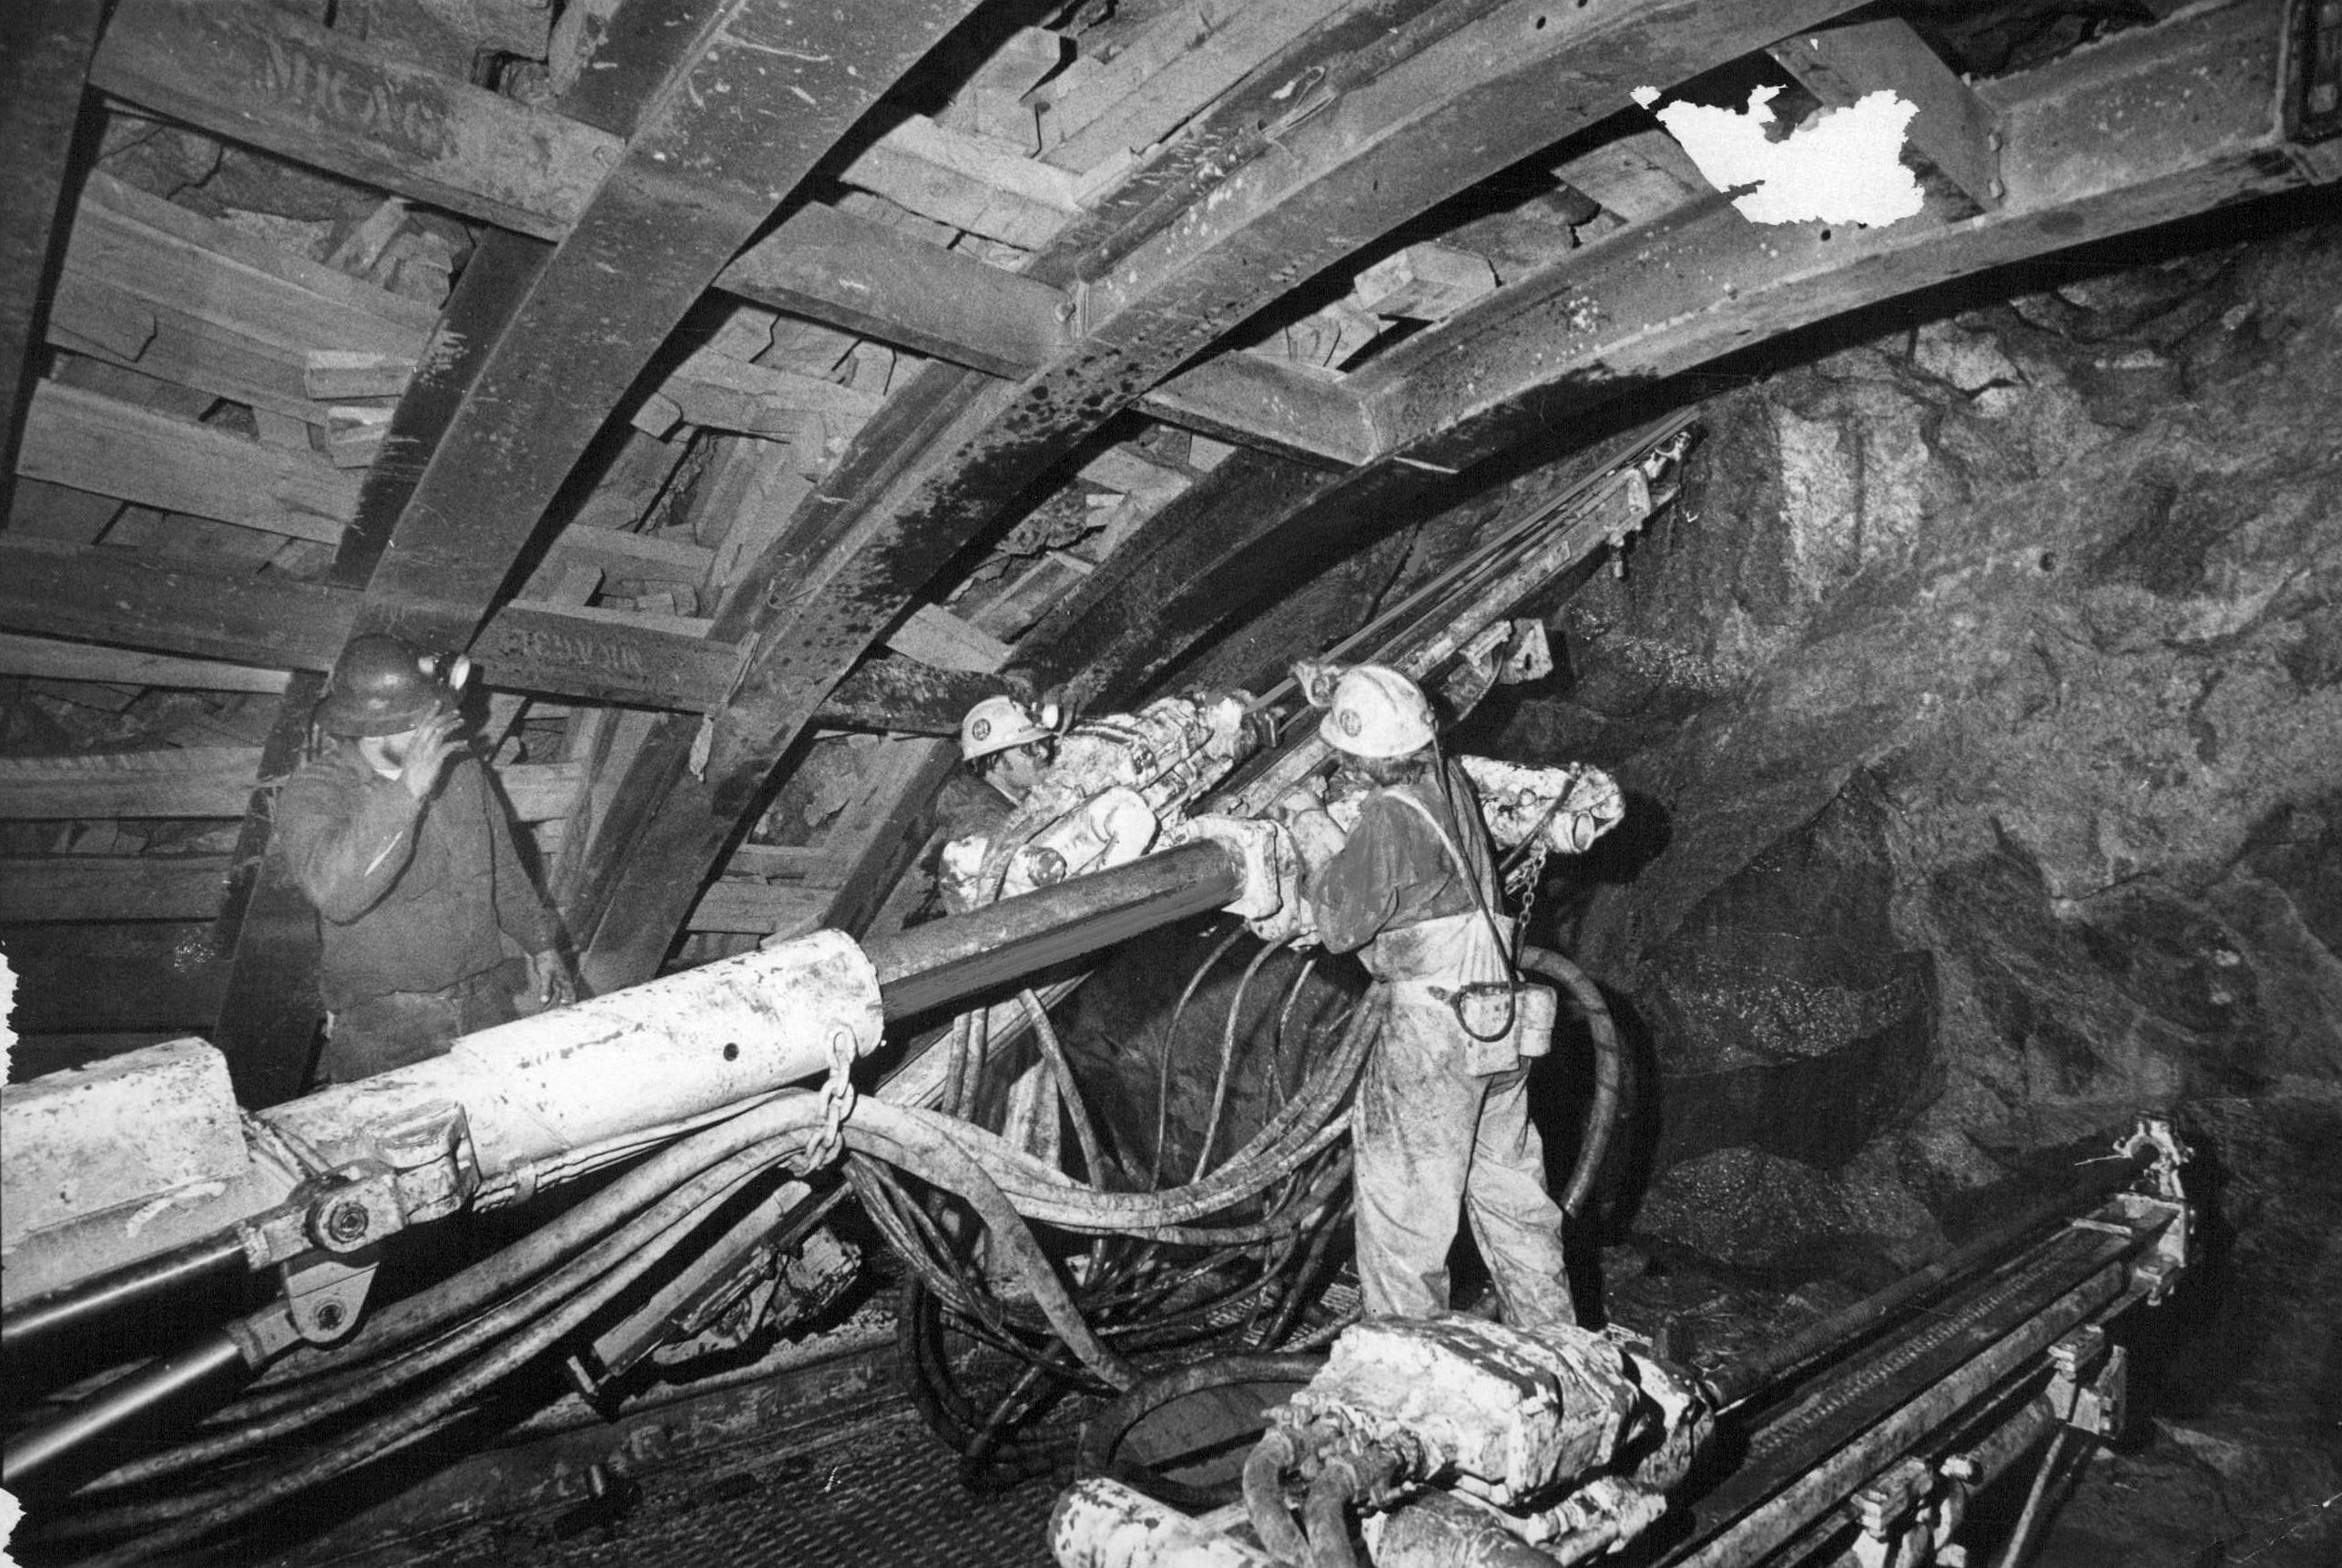 MAY 19 1976, MAY 27 1976, MAY 31 1976, DEC 19 1979, DEC 20 1979, Eisenhower Tunnel (2nd Bore) Credit: Denver Post (Denver Post via Getty Images)